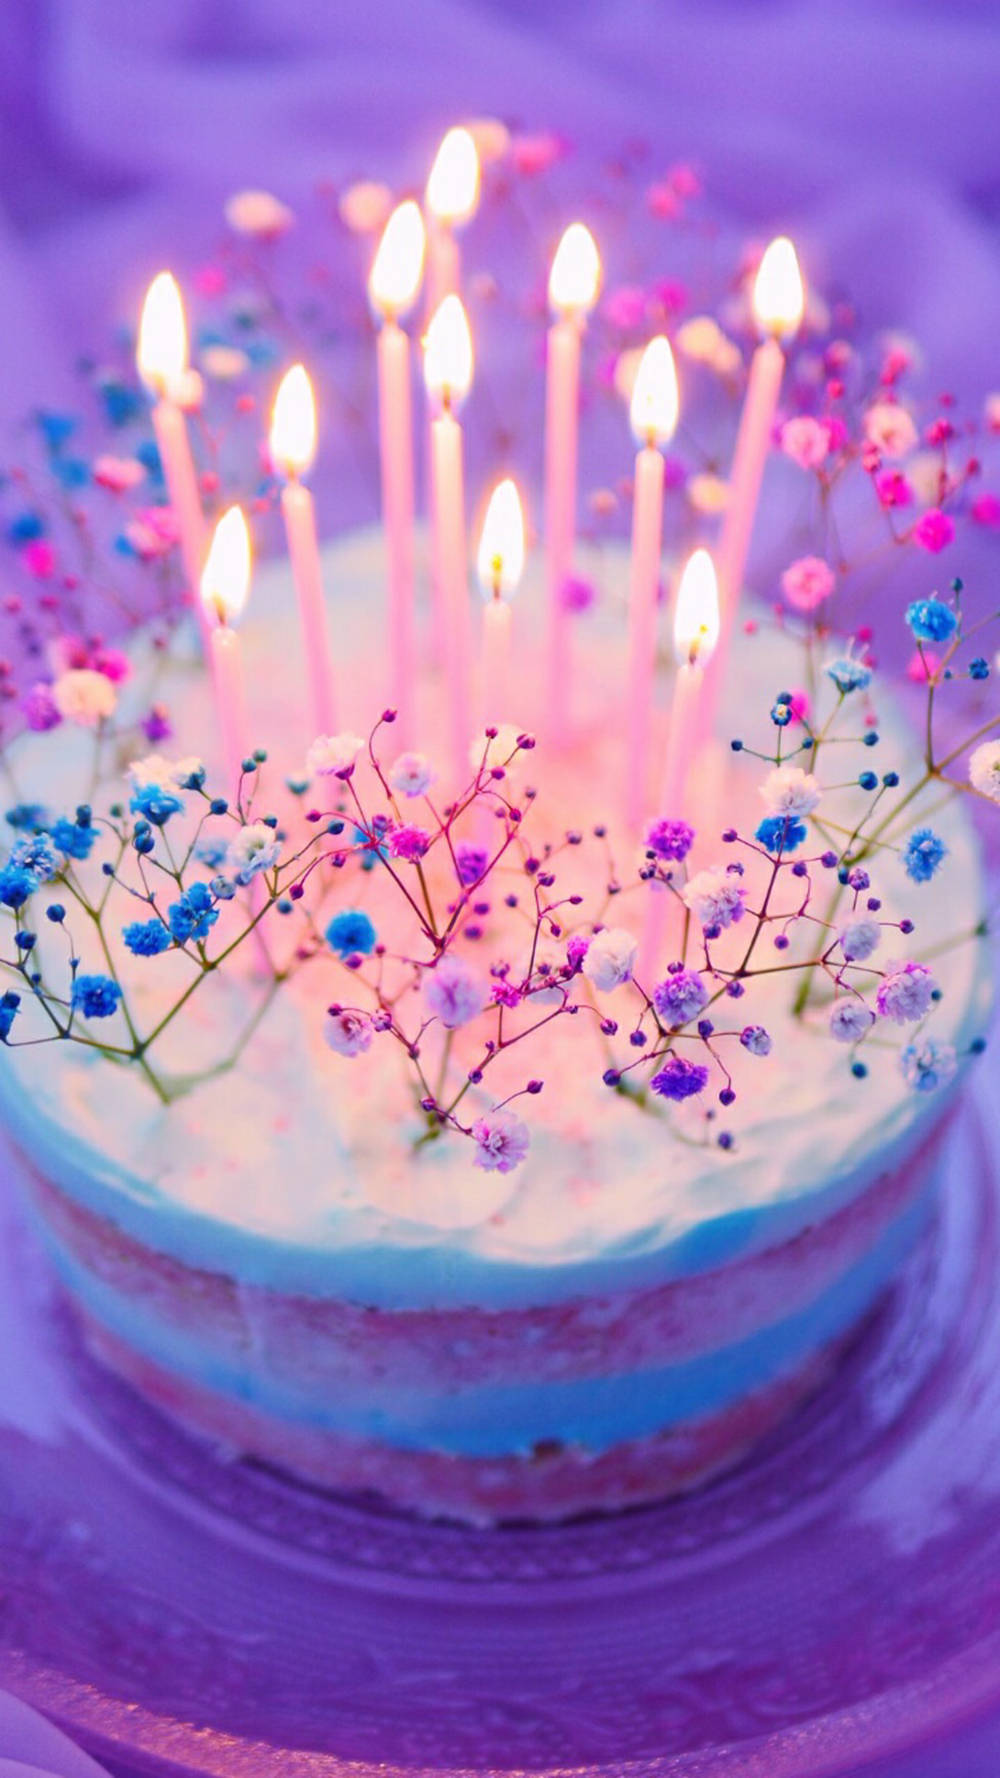 Aesthetic Happy Birthday Cake And Candles